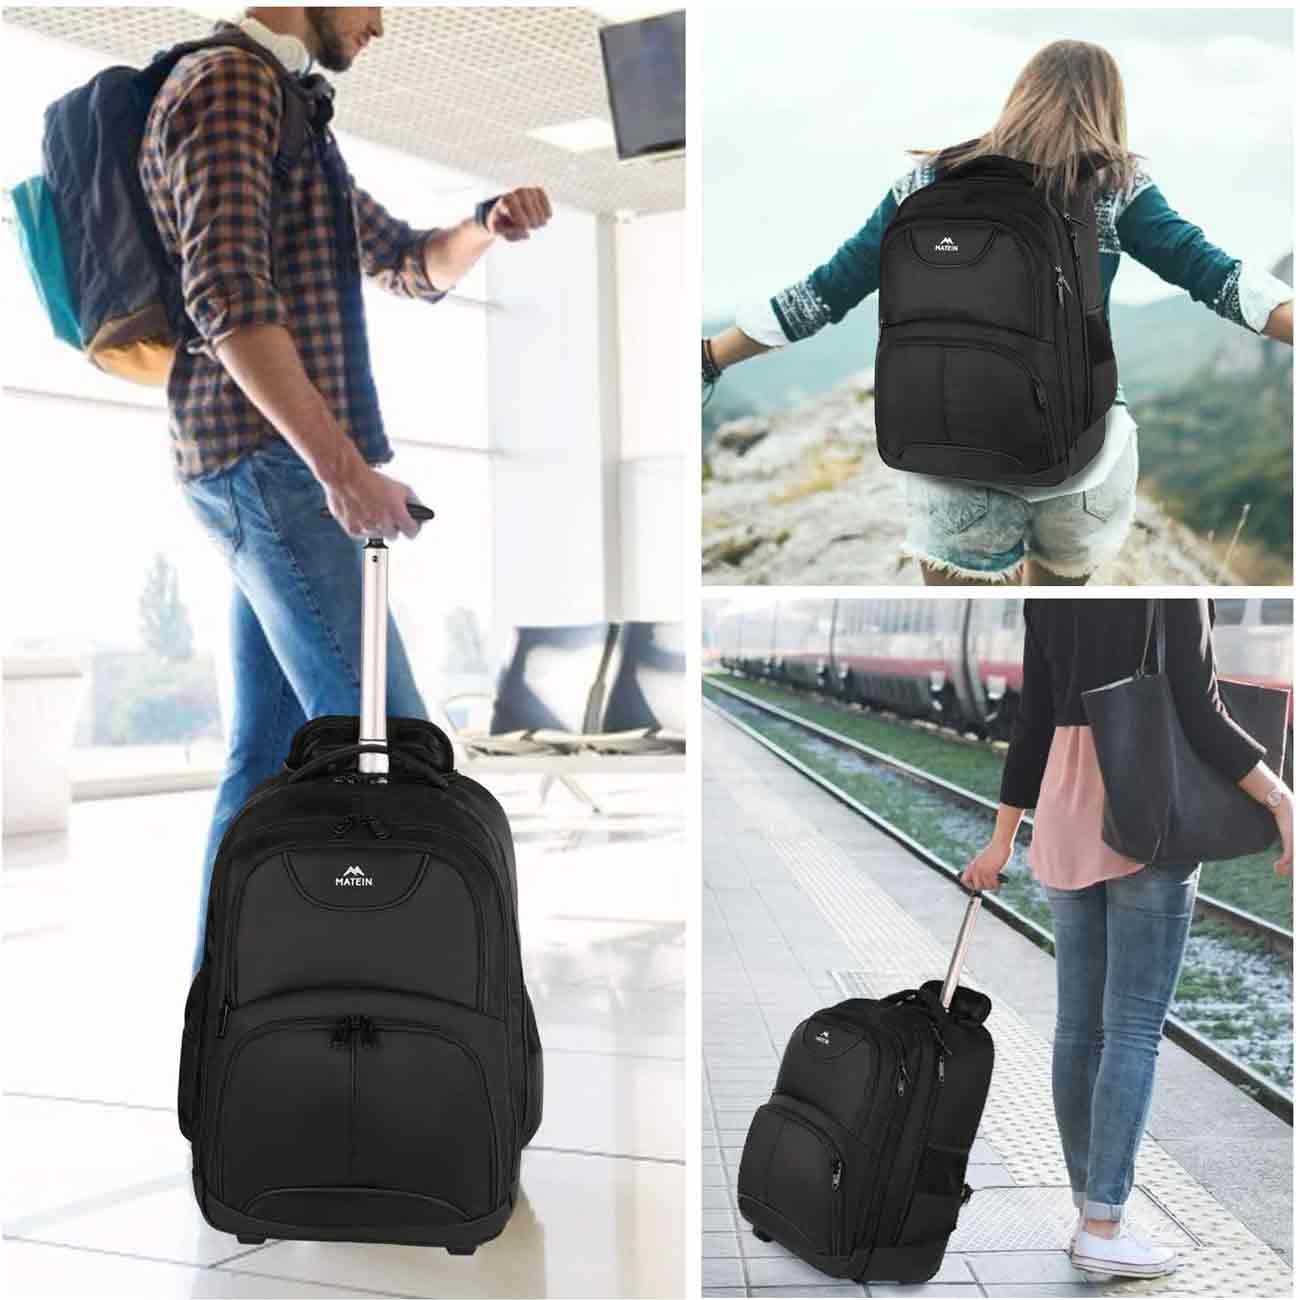 Matein Laptop Roller Bag with 3 Packing Cubes